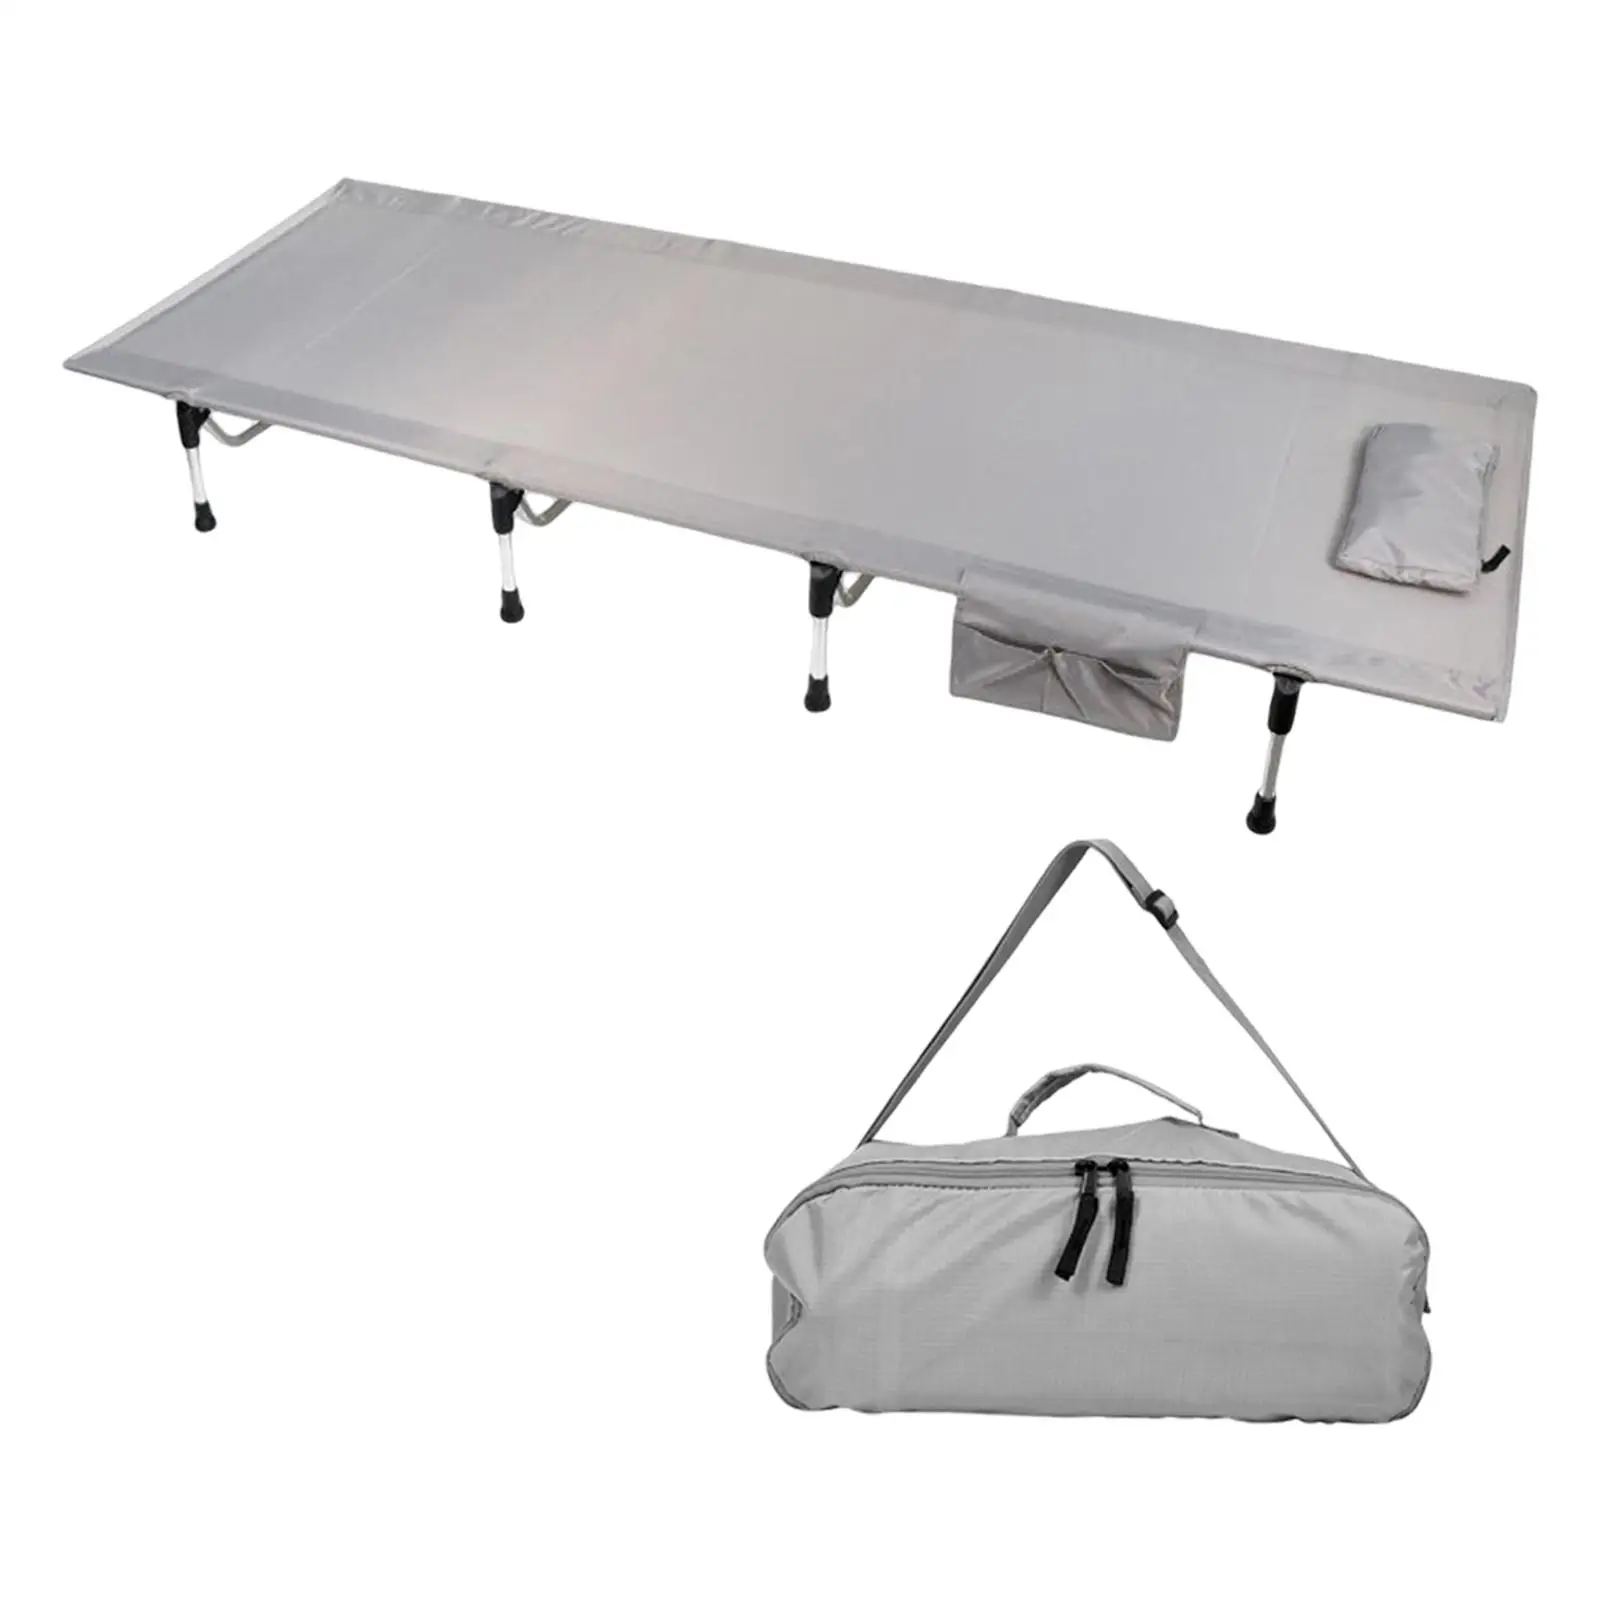 72.8inch Folding Camping Cot with Shoulder Bag Lightweight 26